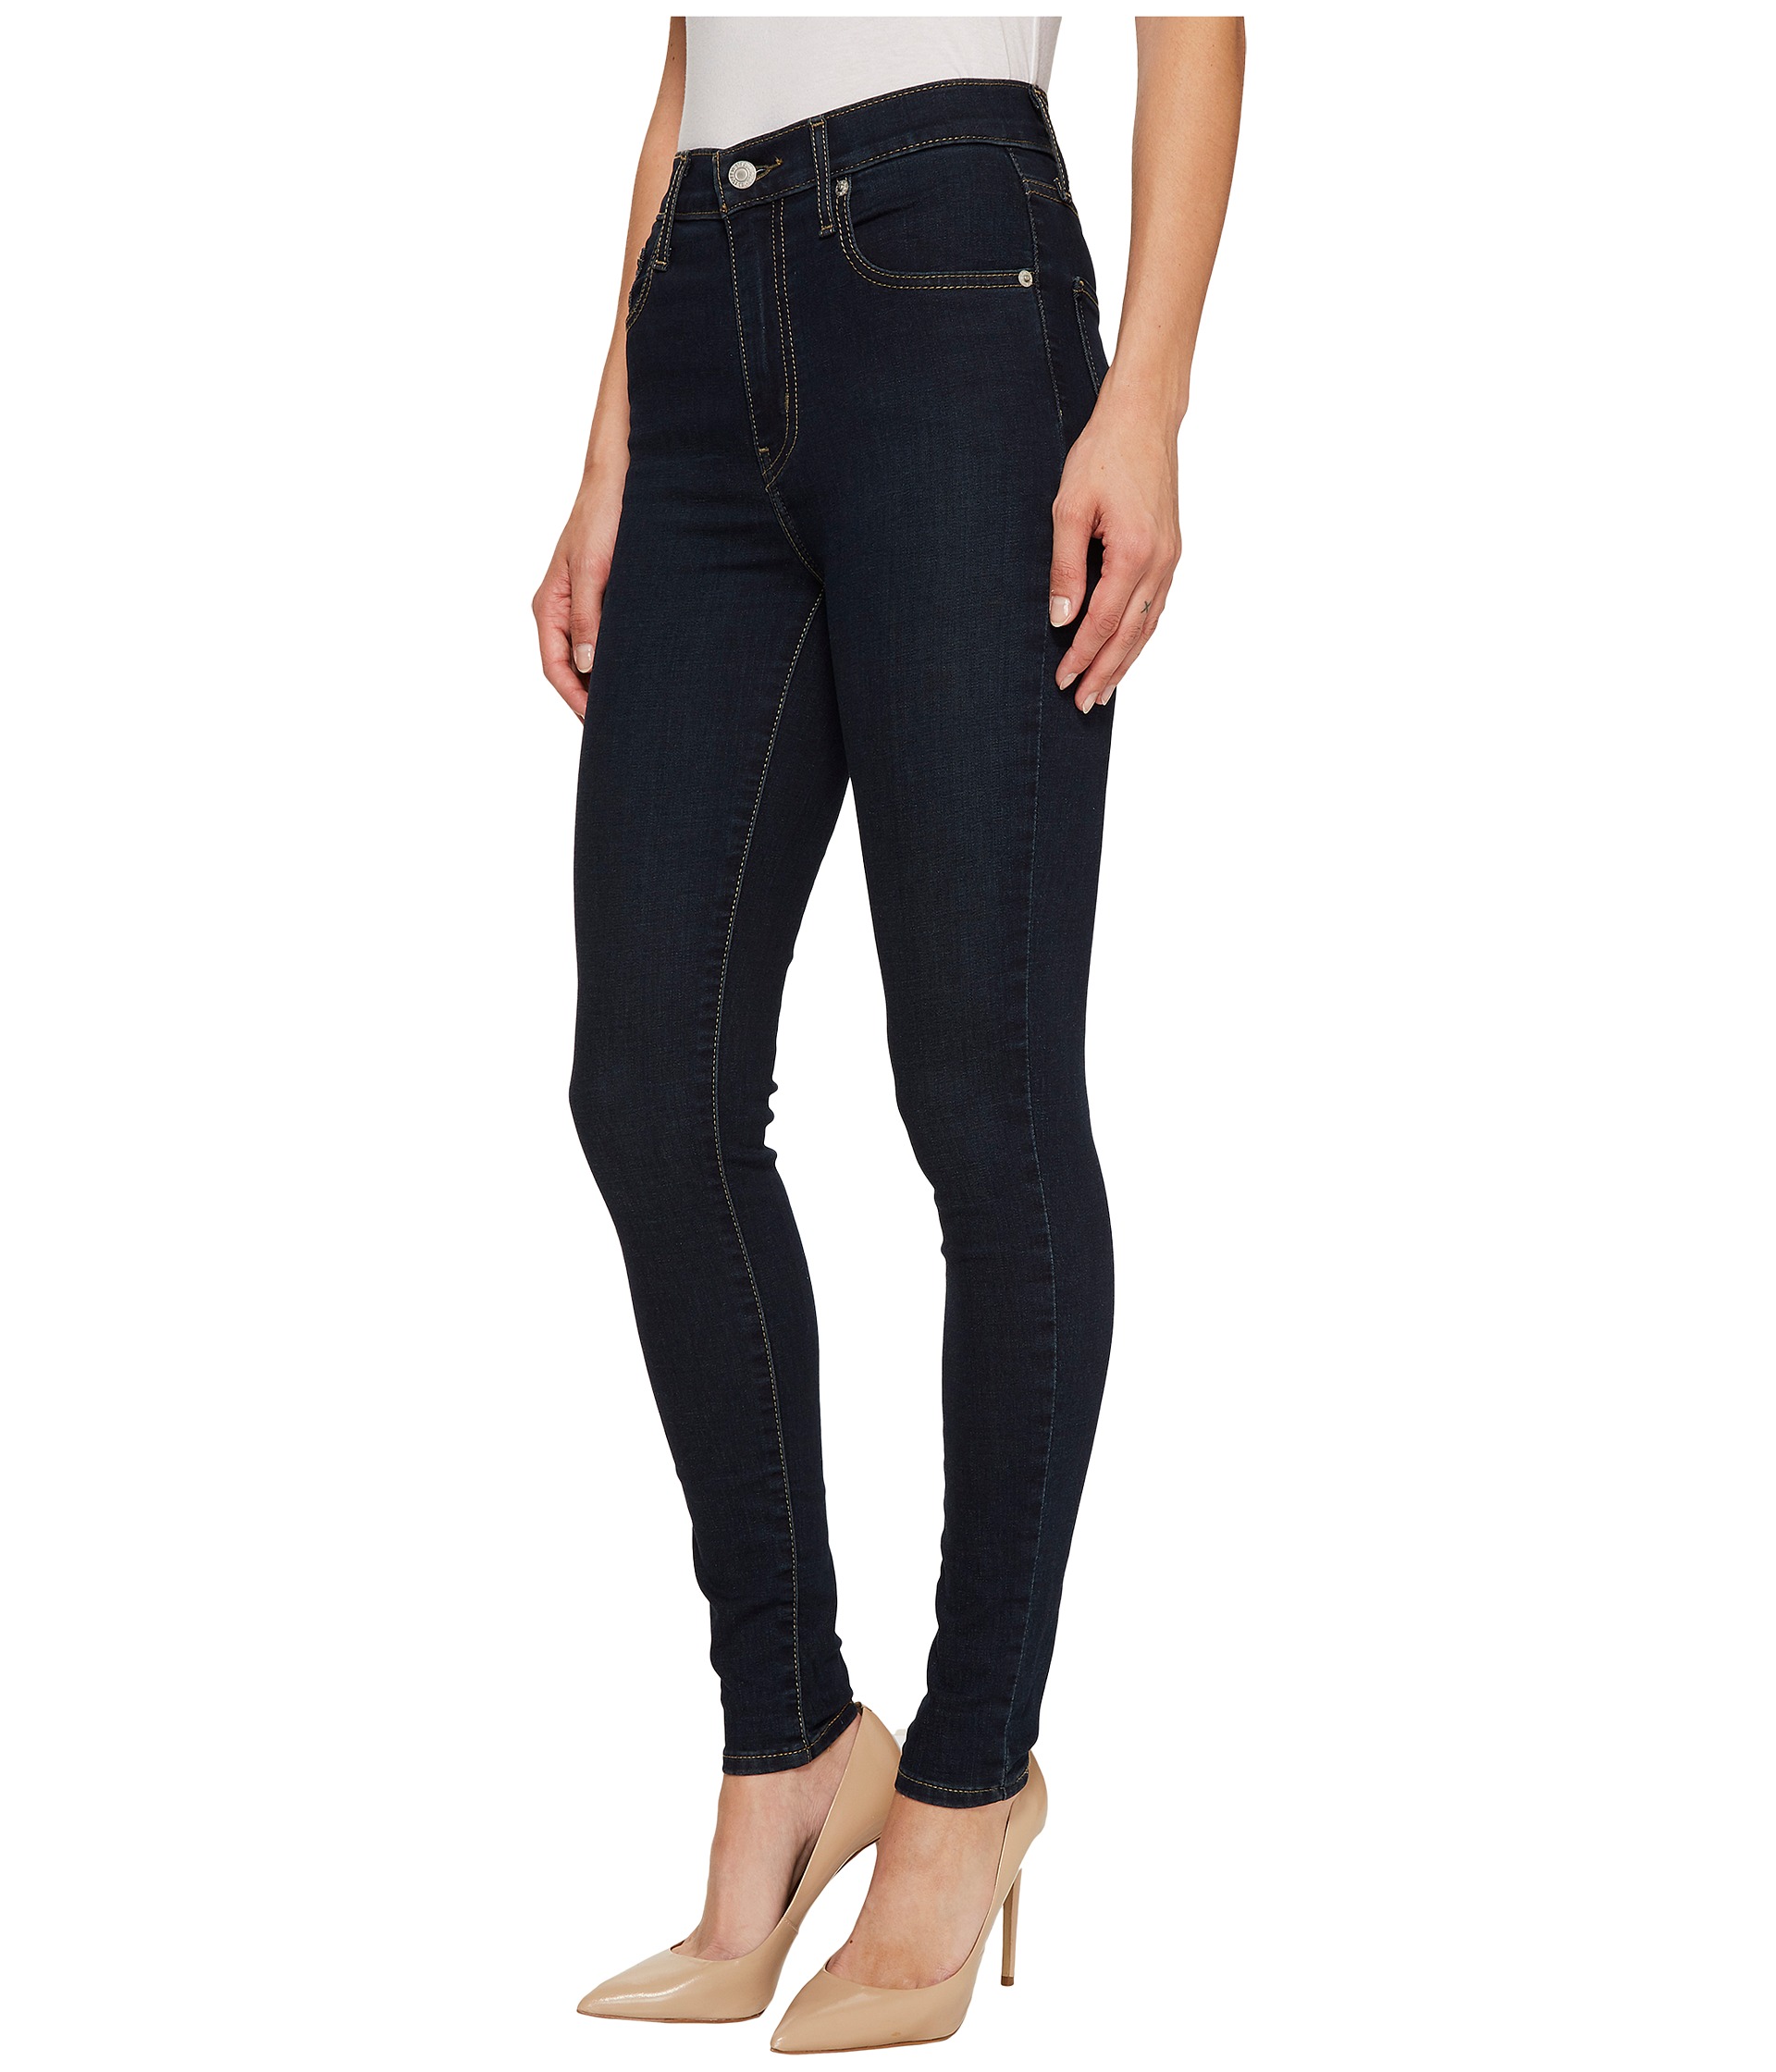 Levi's® Womens Mile High Super Skinny at Zappos.com